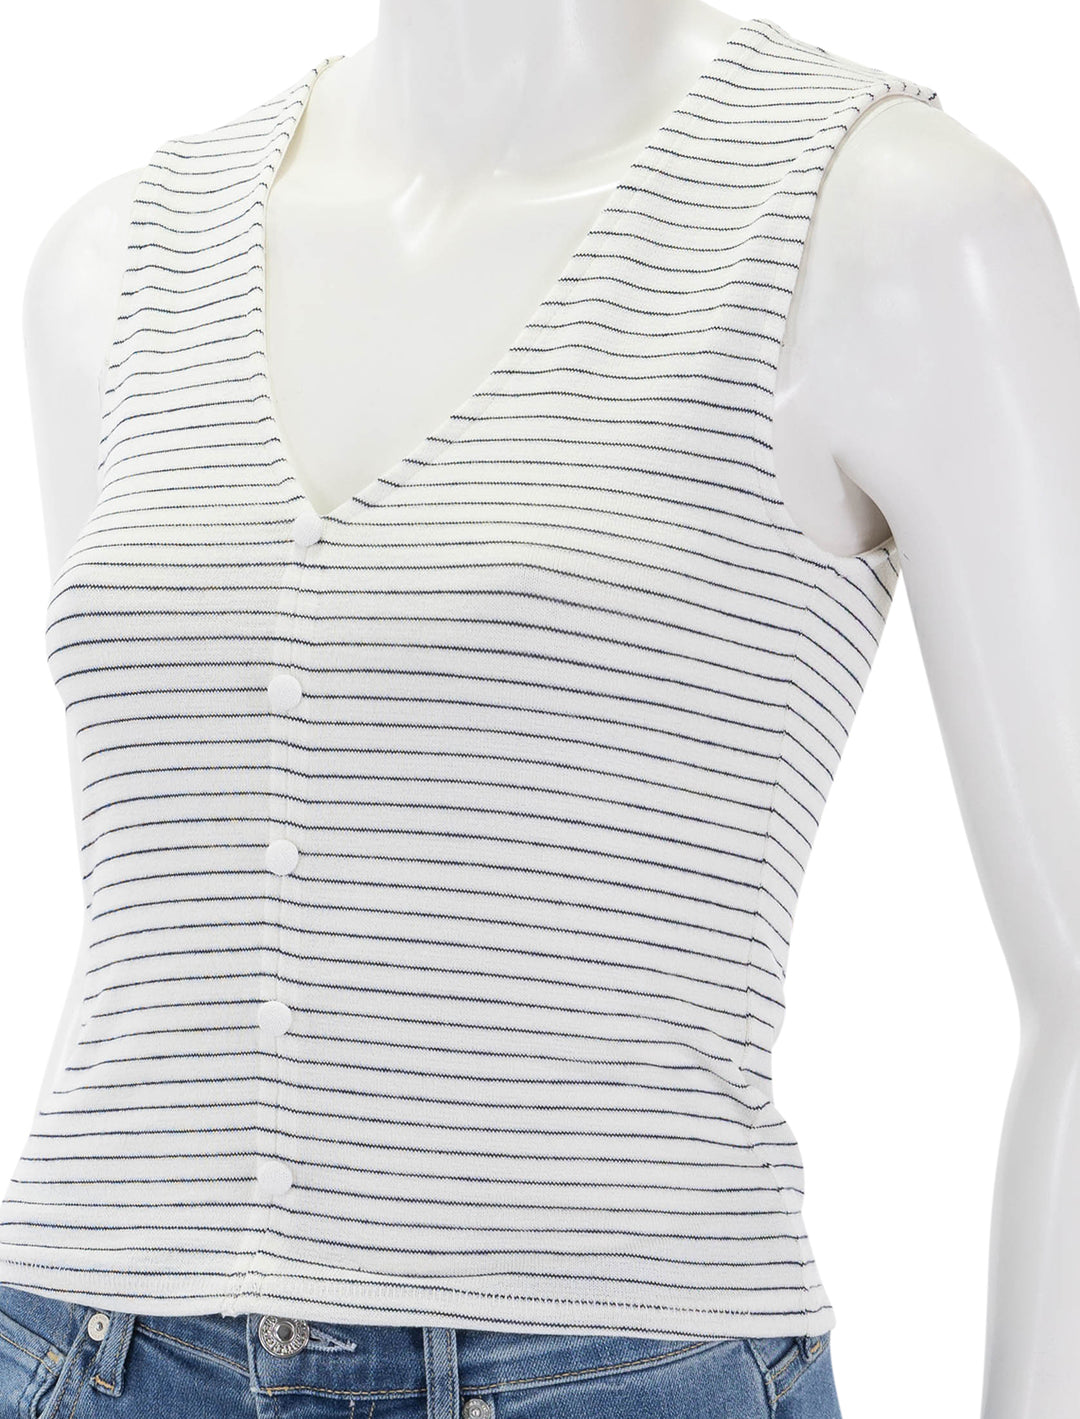 Close-up view of Rag & Bone's the knit stripe button up tank in ivorymulti.